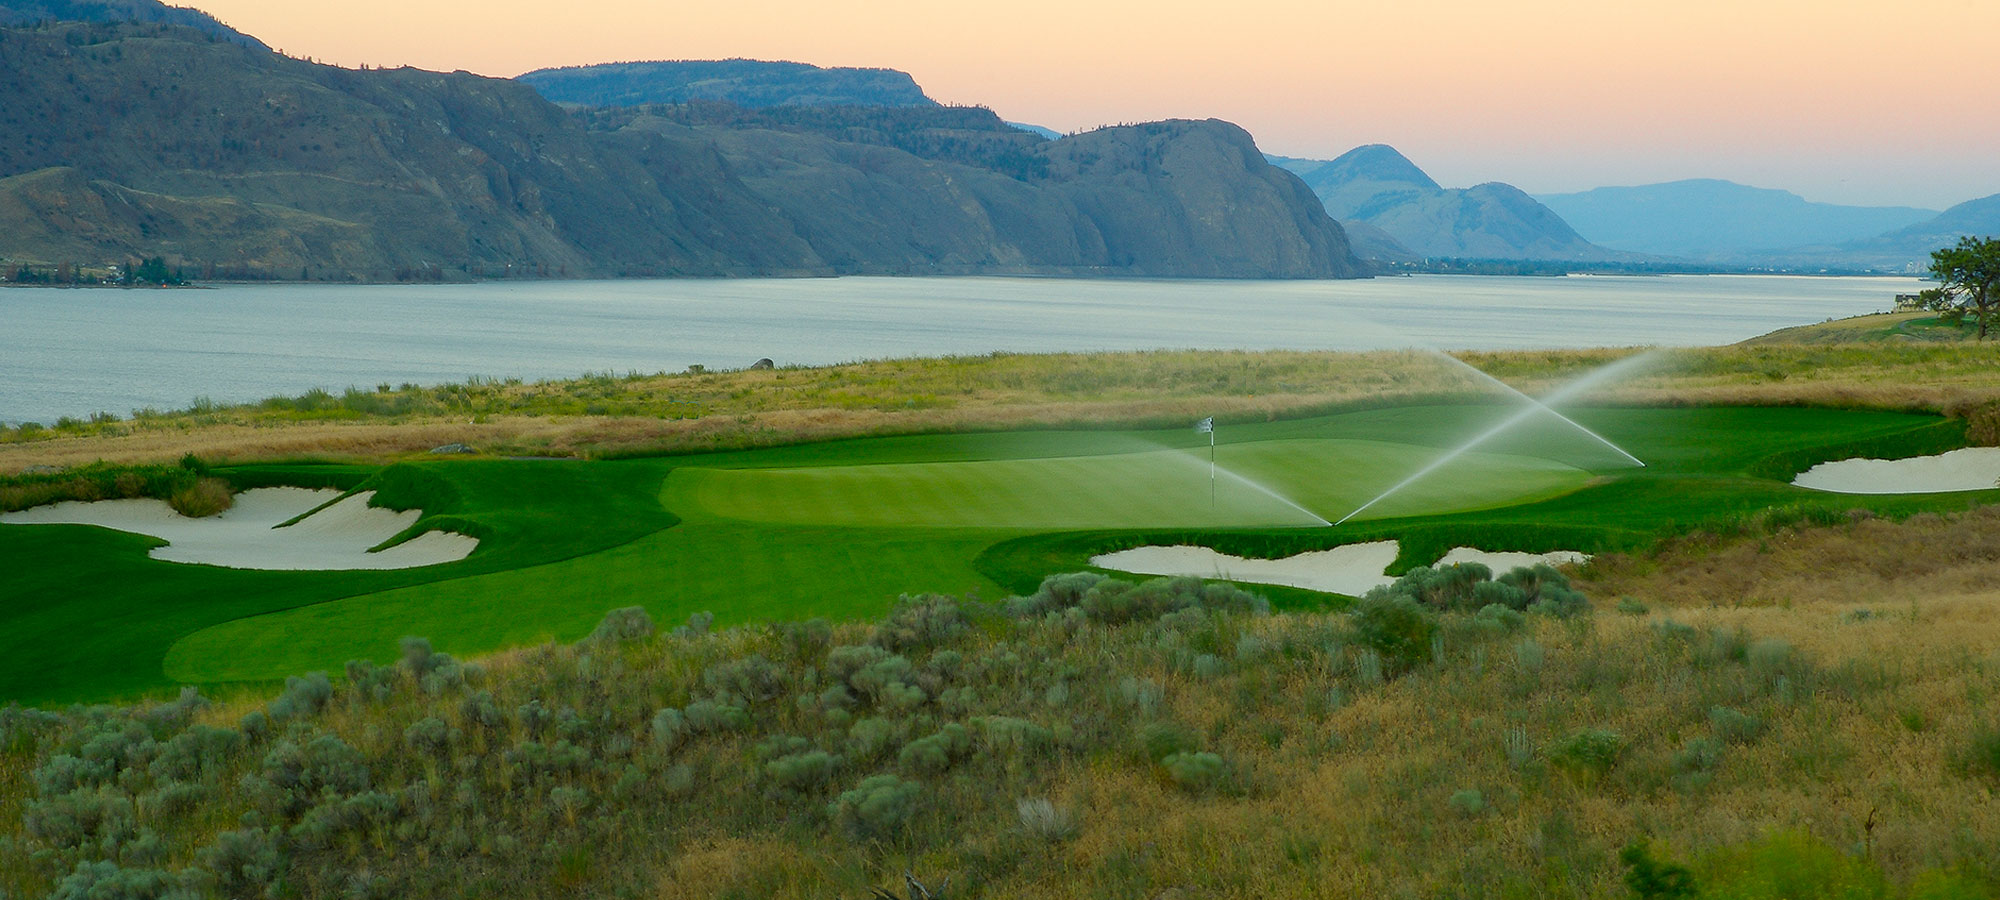 Kamloops Golf Course | Tobiano - BC's Best Public Golf Course